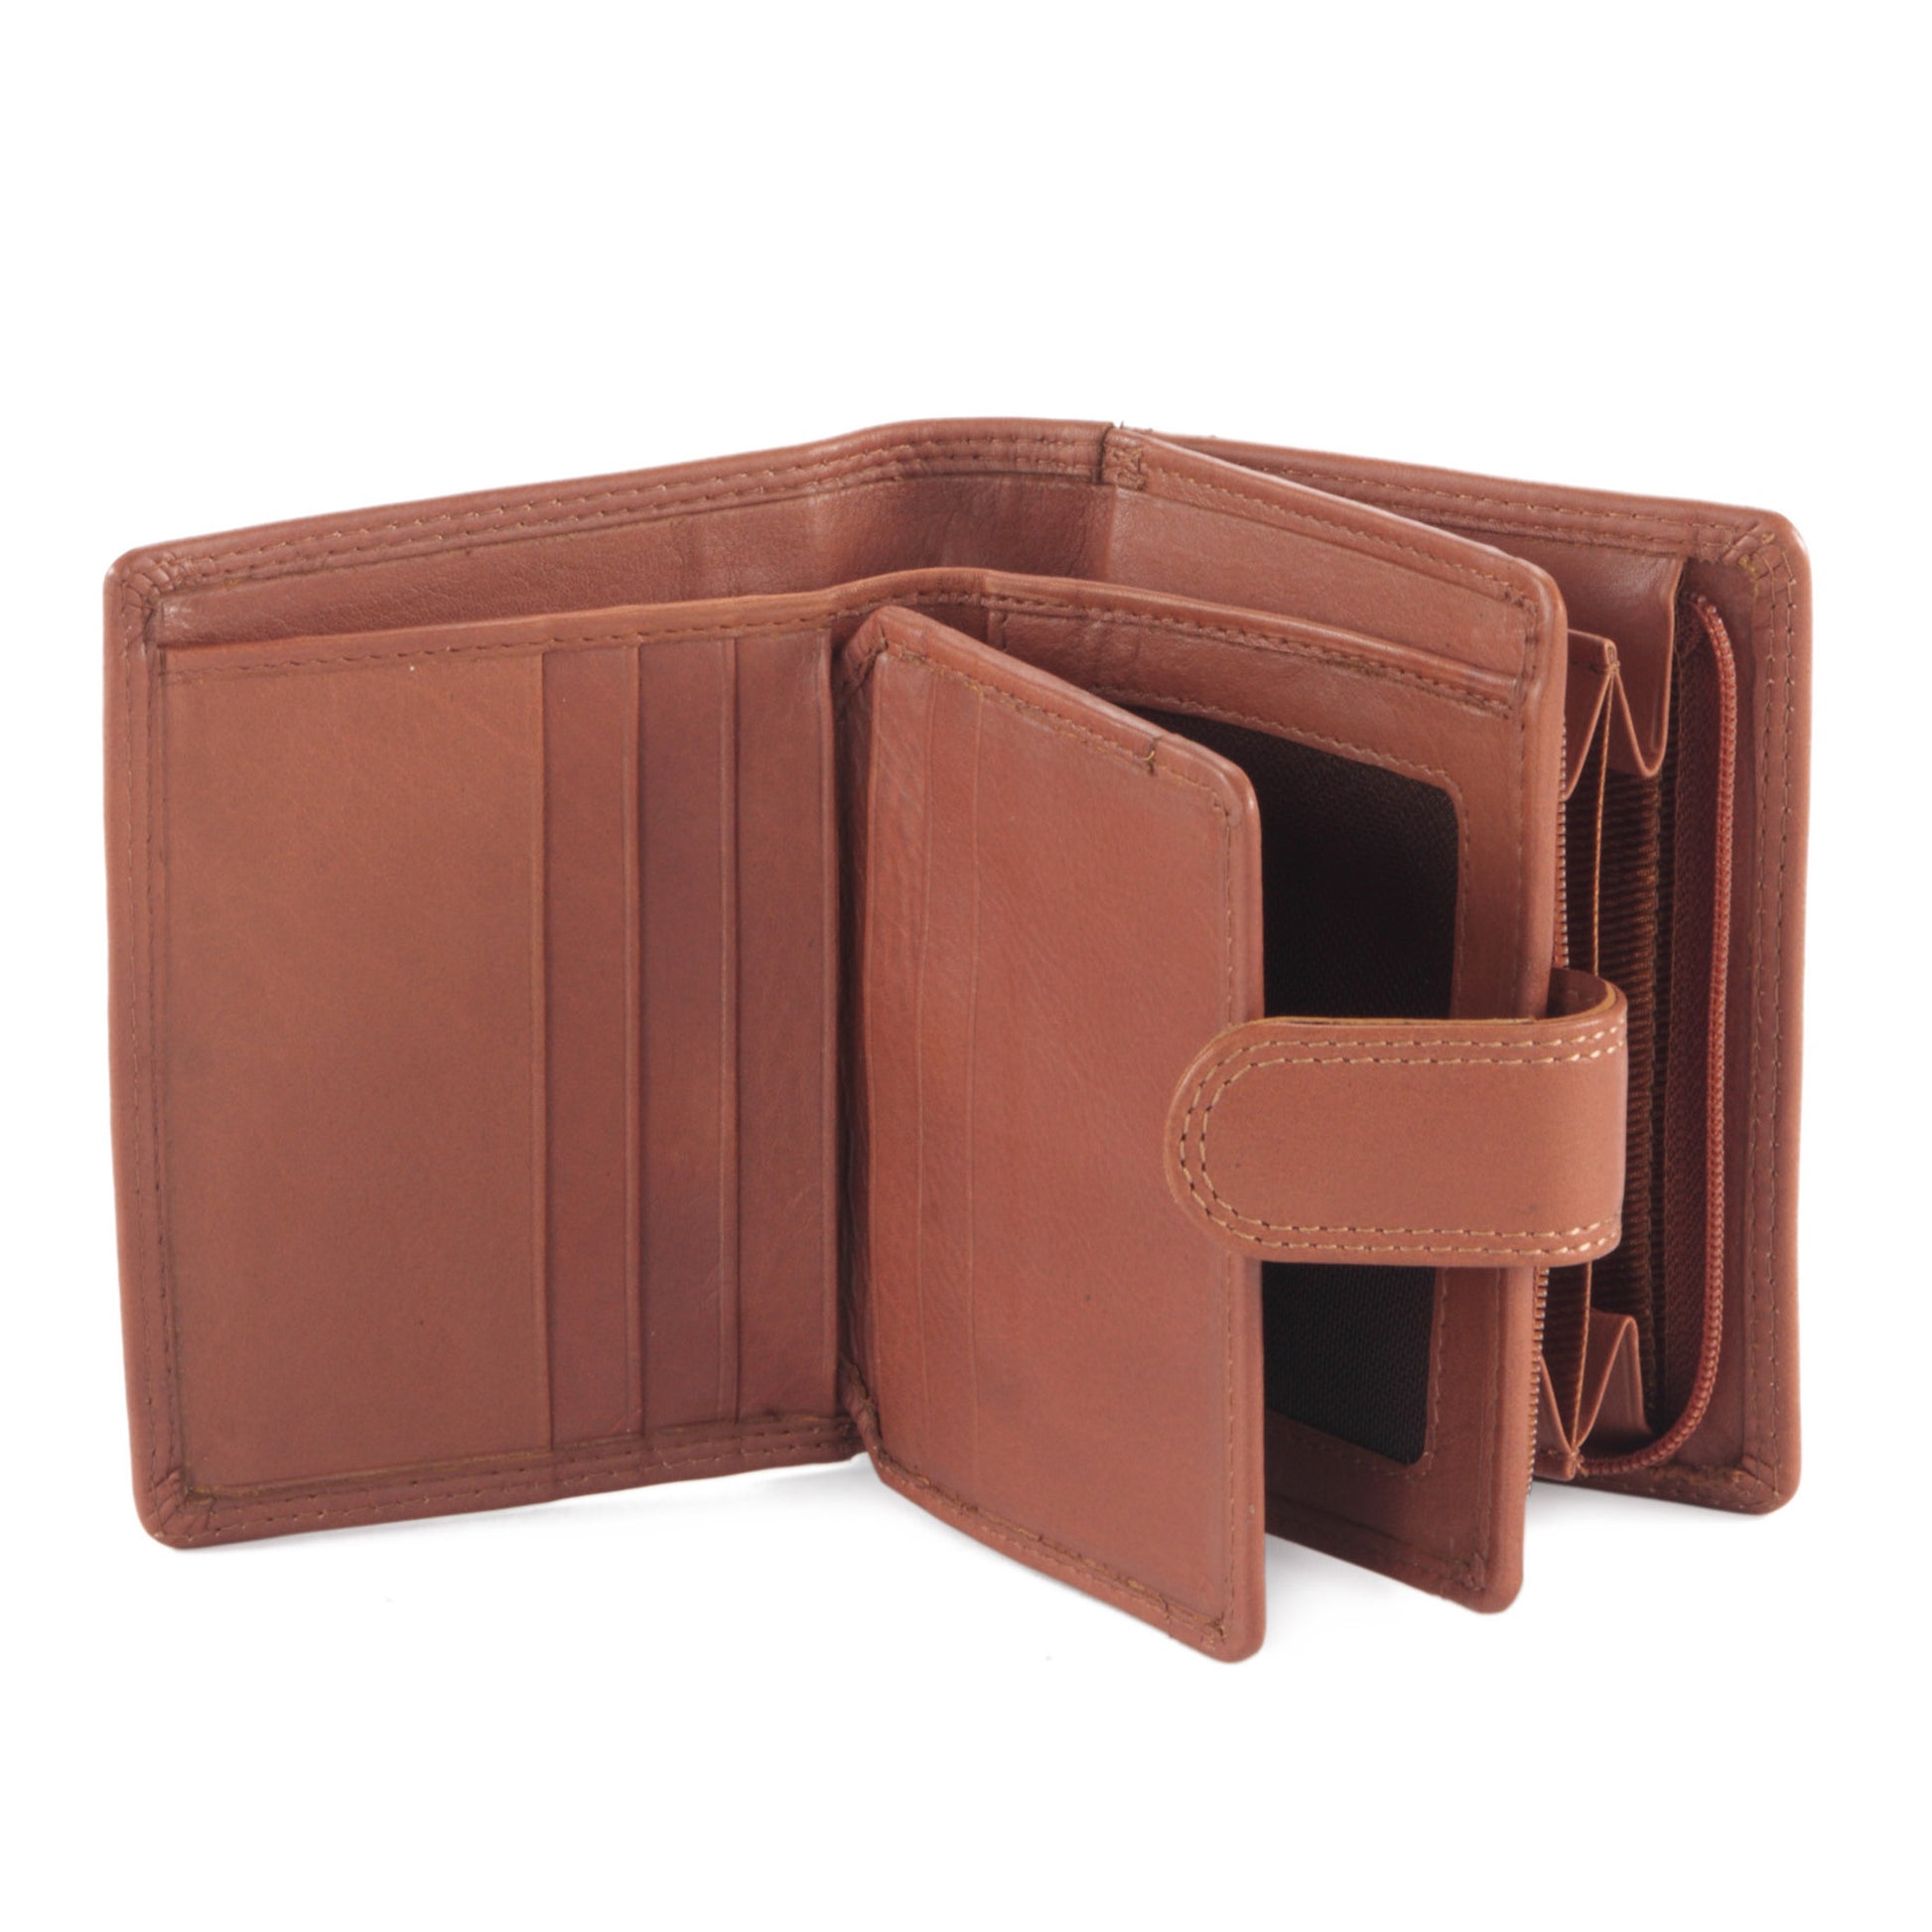 Style n Craft 300952-CG Small Clutch Wallet for Ladies in Leather - tan or cognac color - open view 1